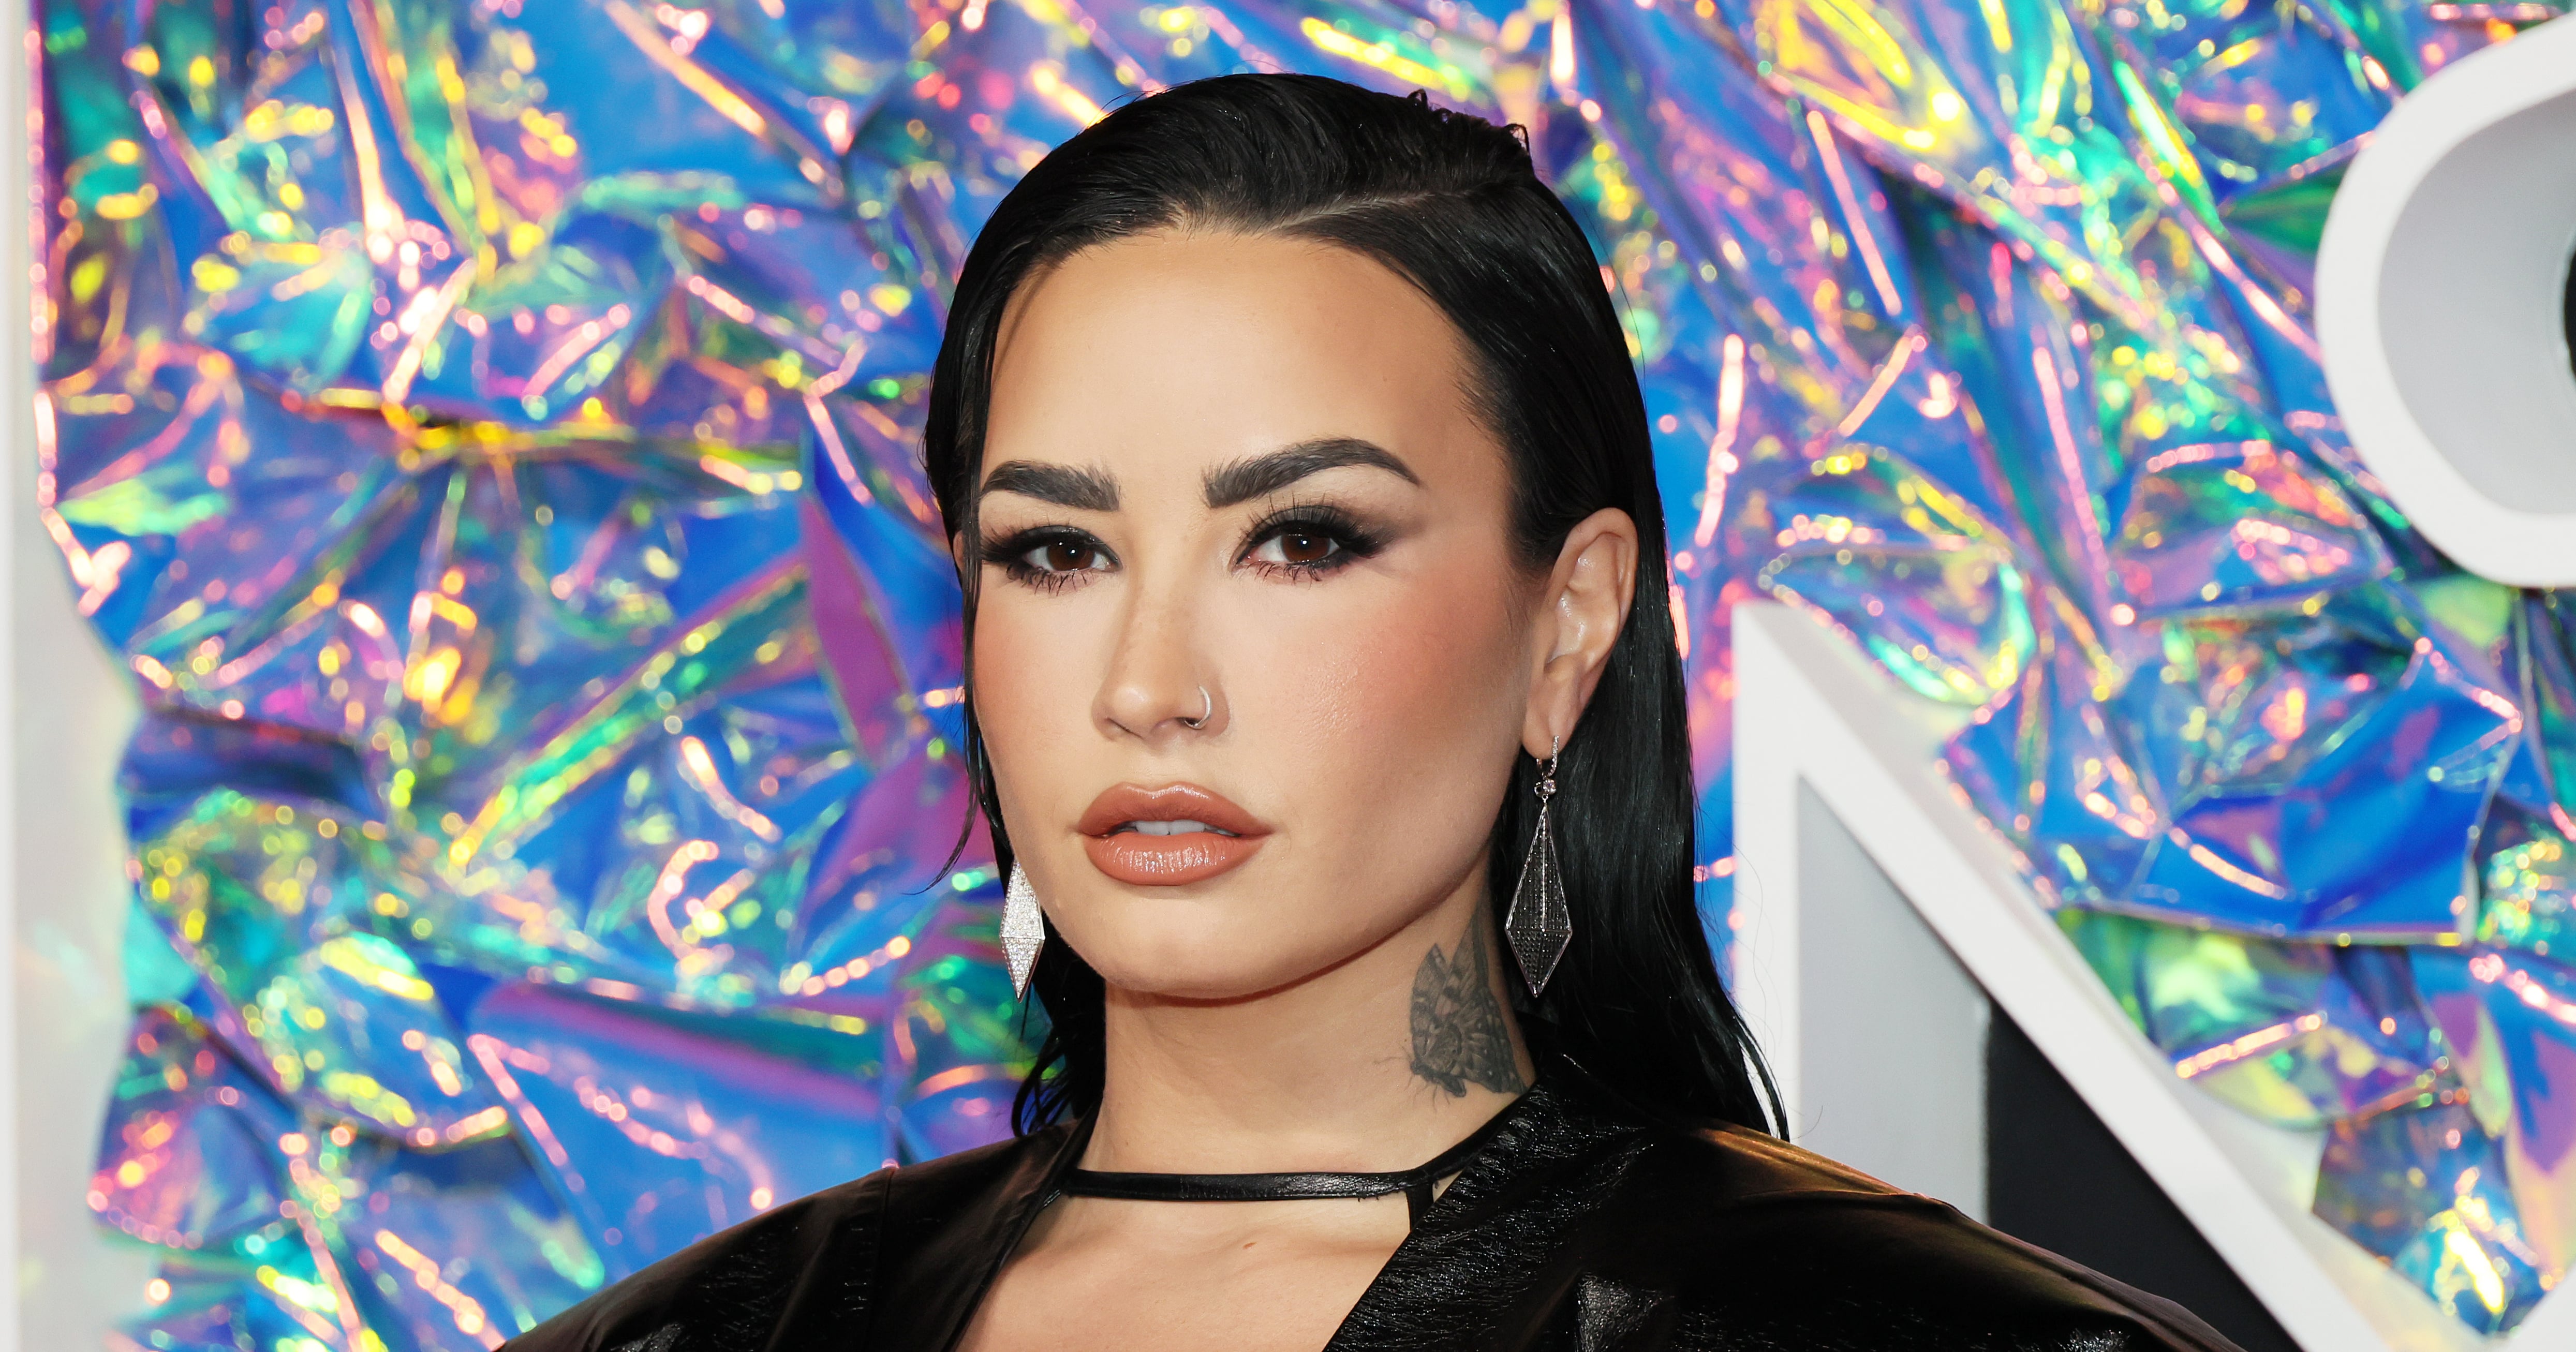 Who Is Demi Lovato’s “Cool For the Summer” About?